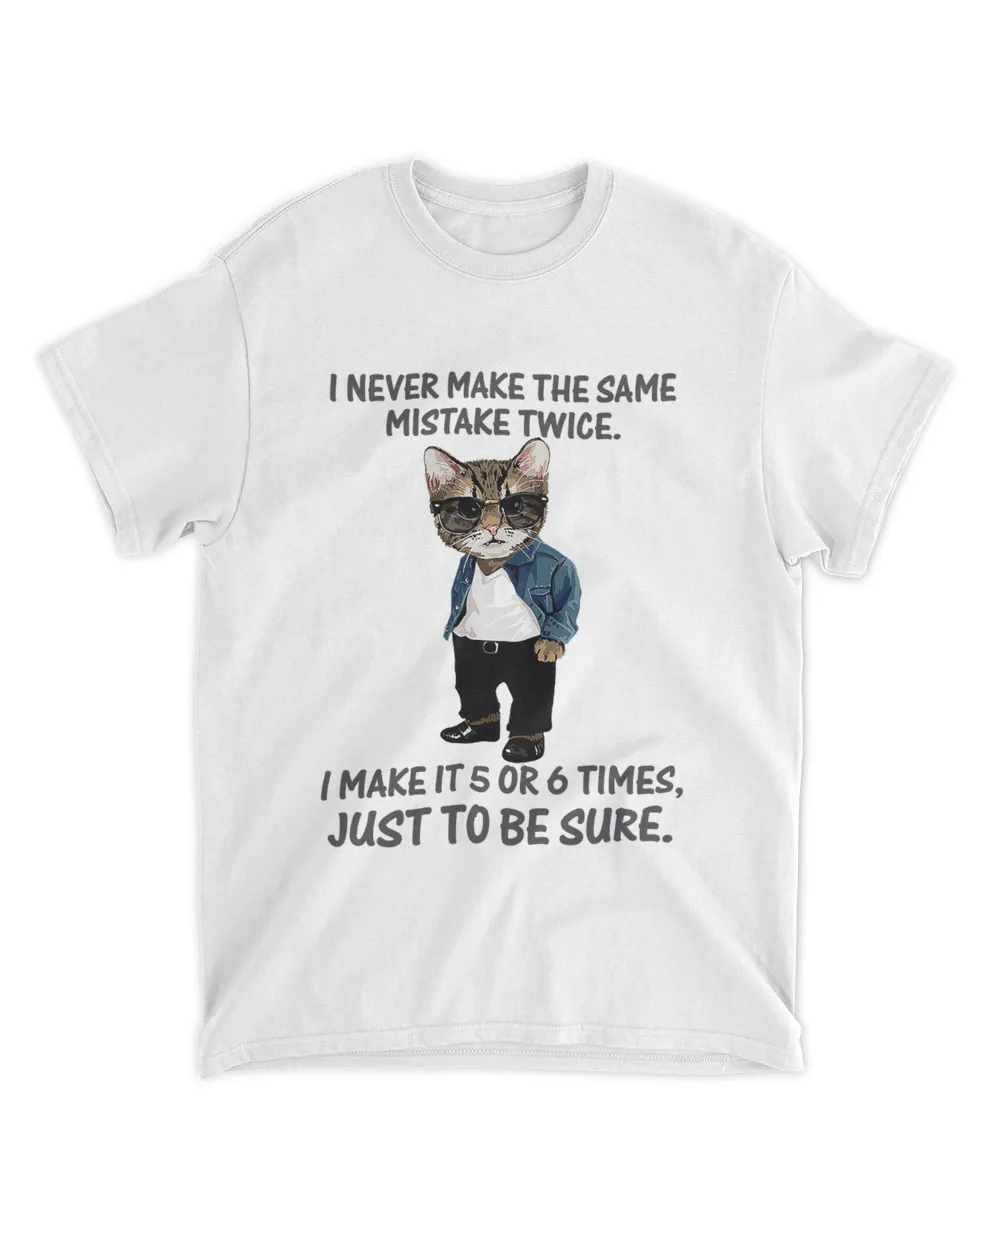 I Never Make The Same Mistake Twice I Make It 5 Or 6 Times Just To Be Sure Cat Shirt Unisex Standard T-Shirt white 